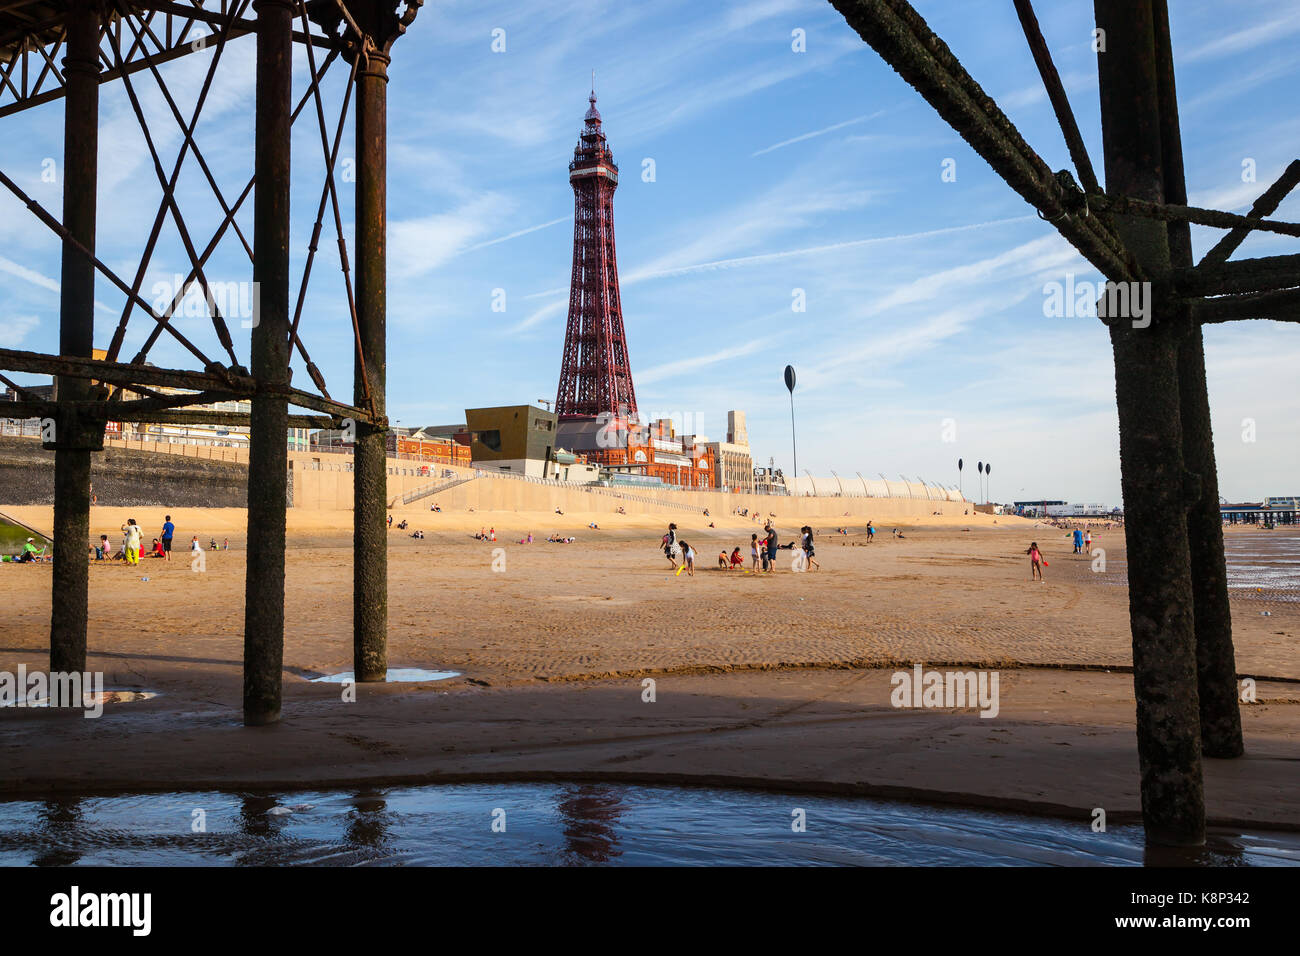 A view of Blackpool's famous tower from underneath the North Pier. Stock Photo